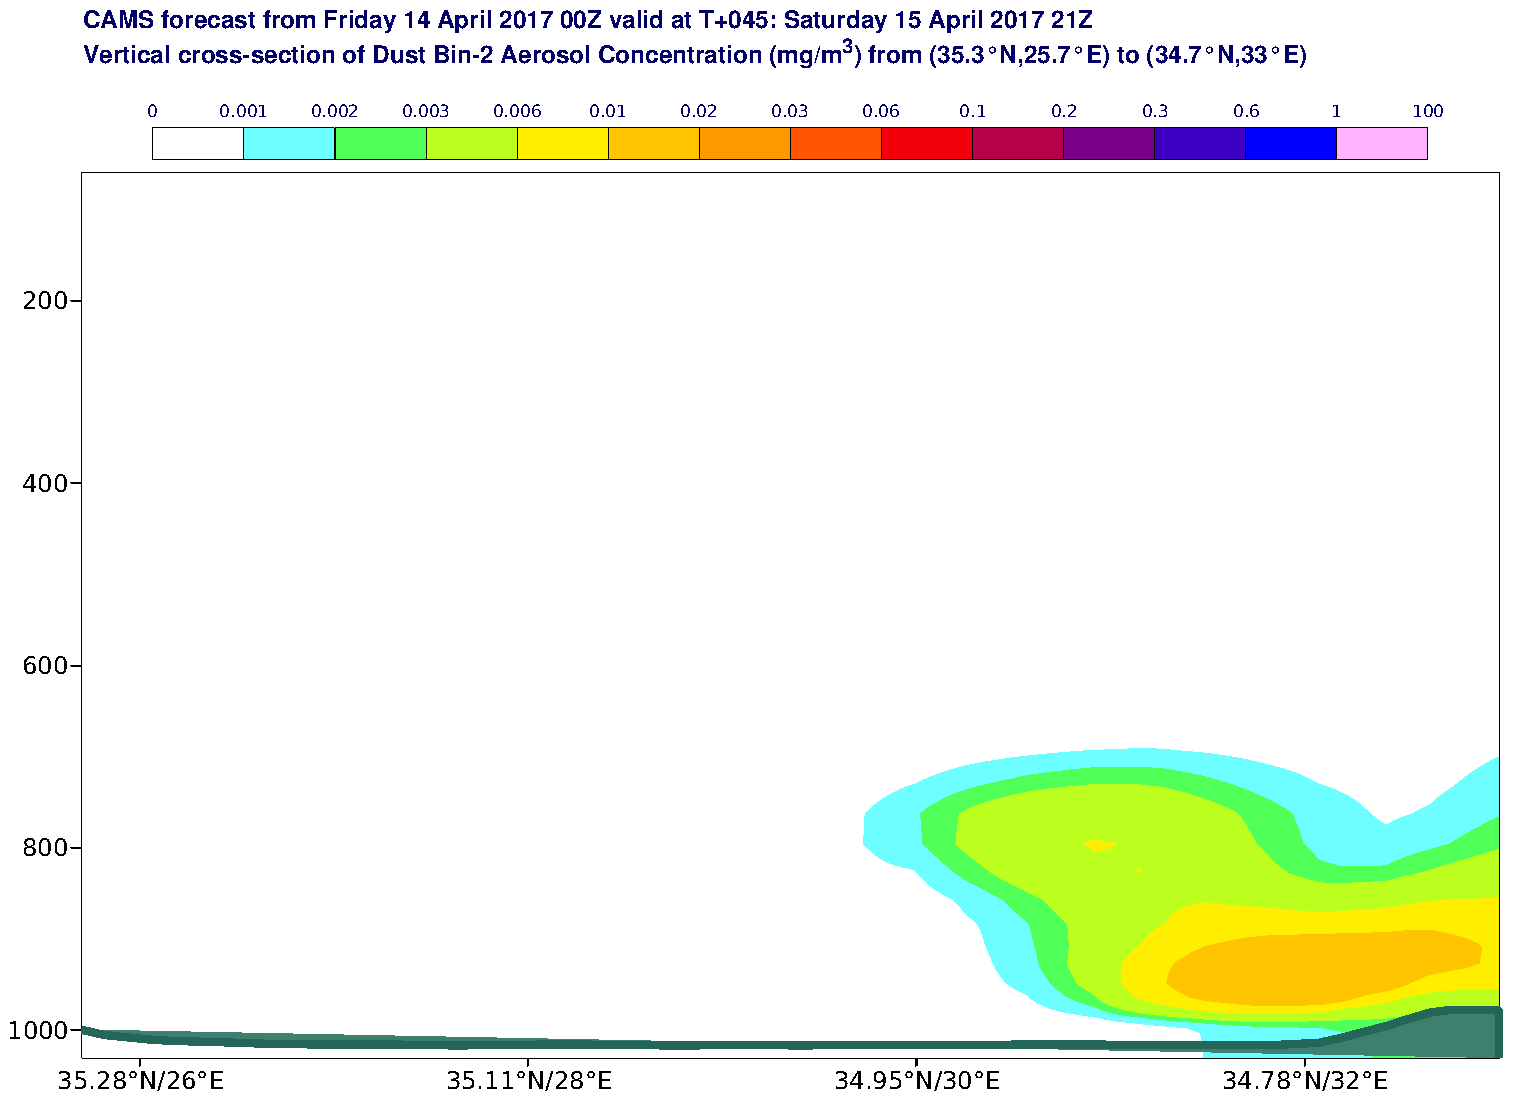 Vertical cross-section of Dust Bin-2 Aerosol Concentration (mg/m3) valid at T45 - 2017-04-15 21:00